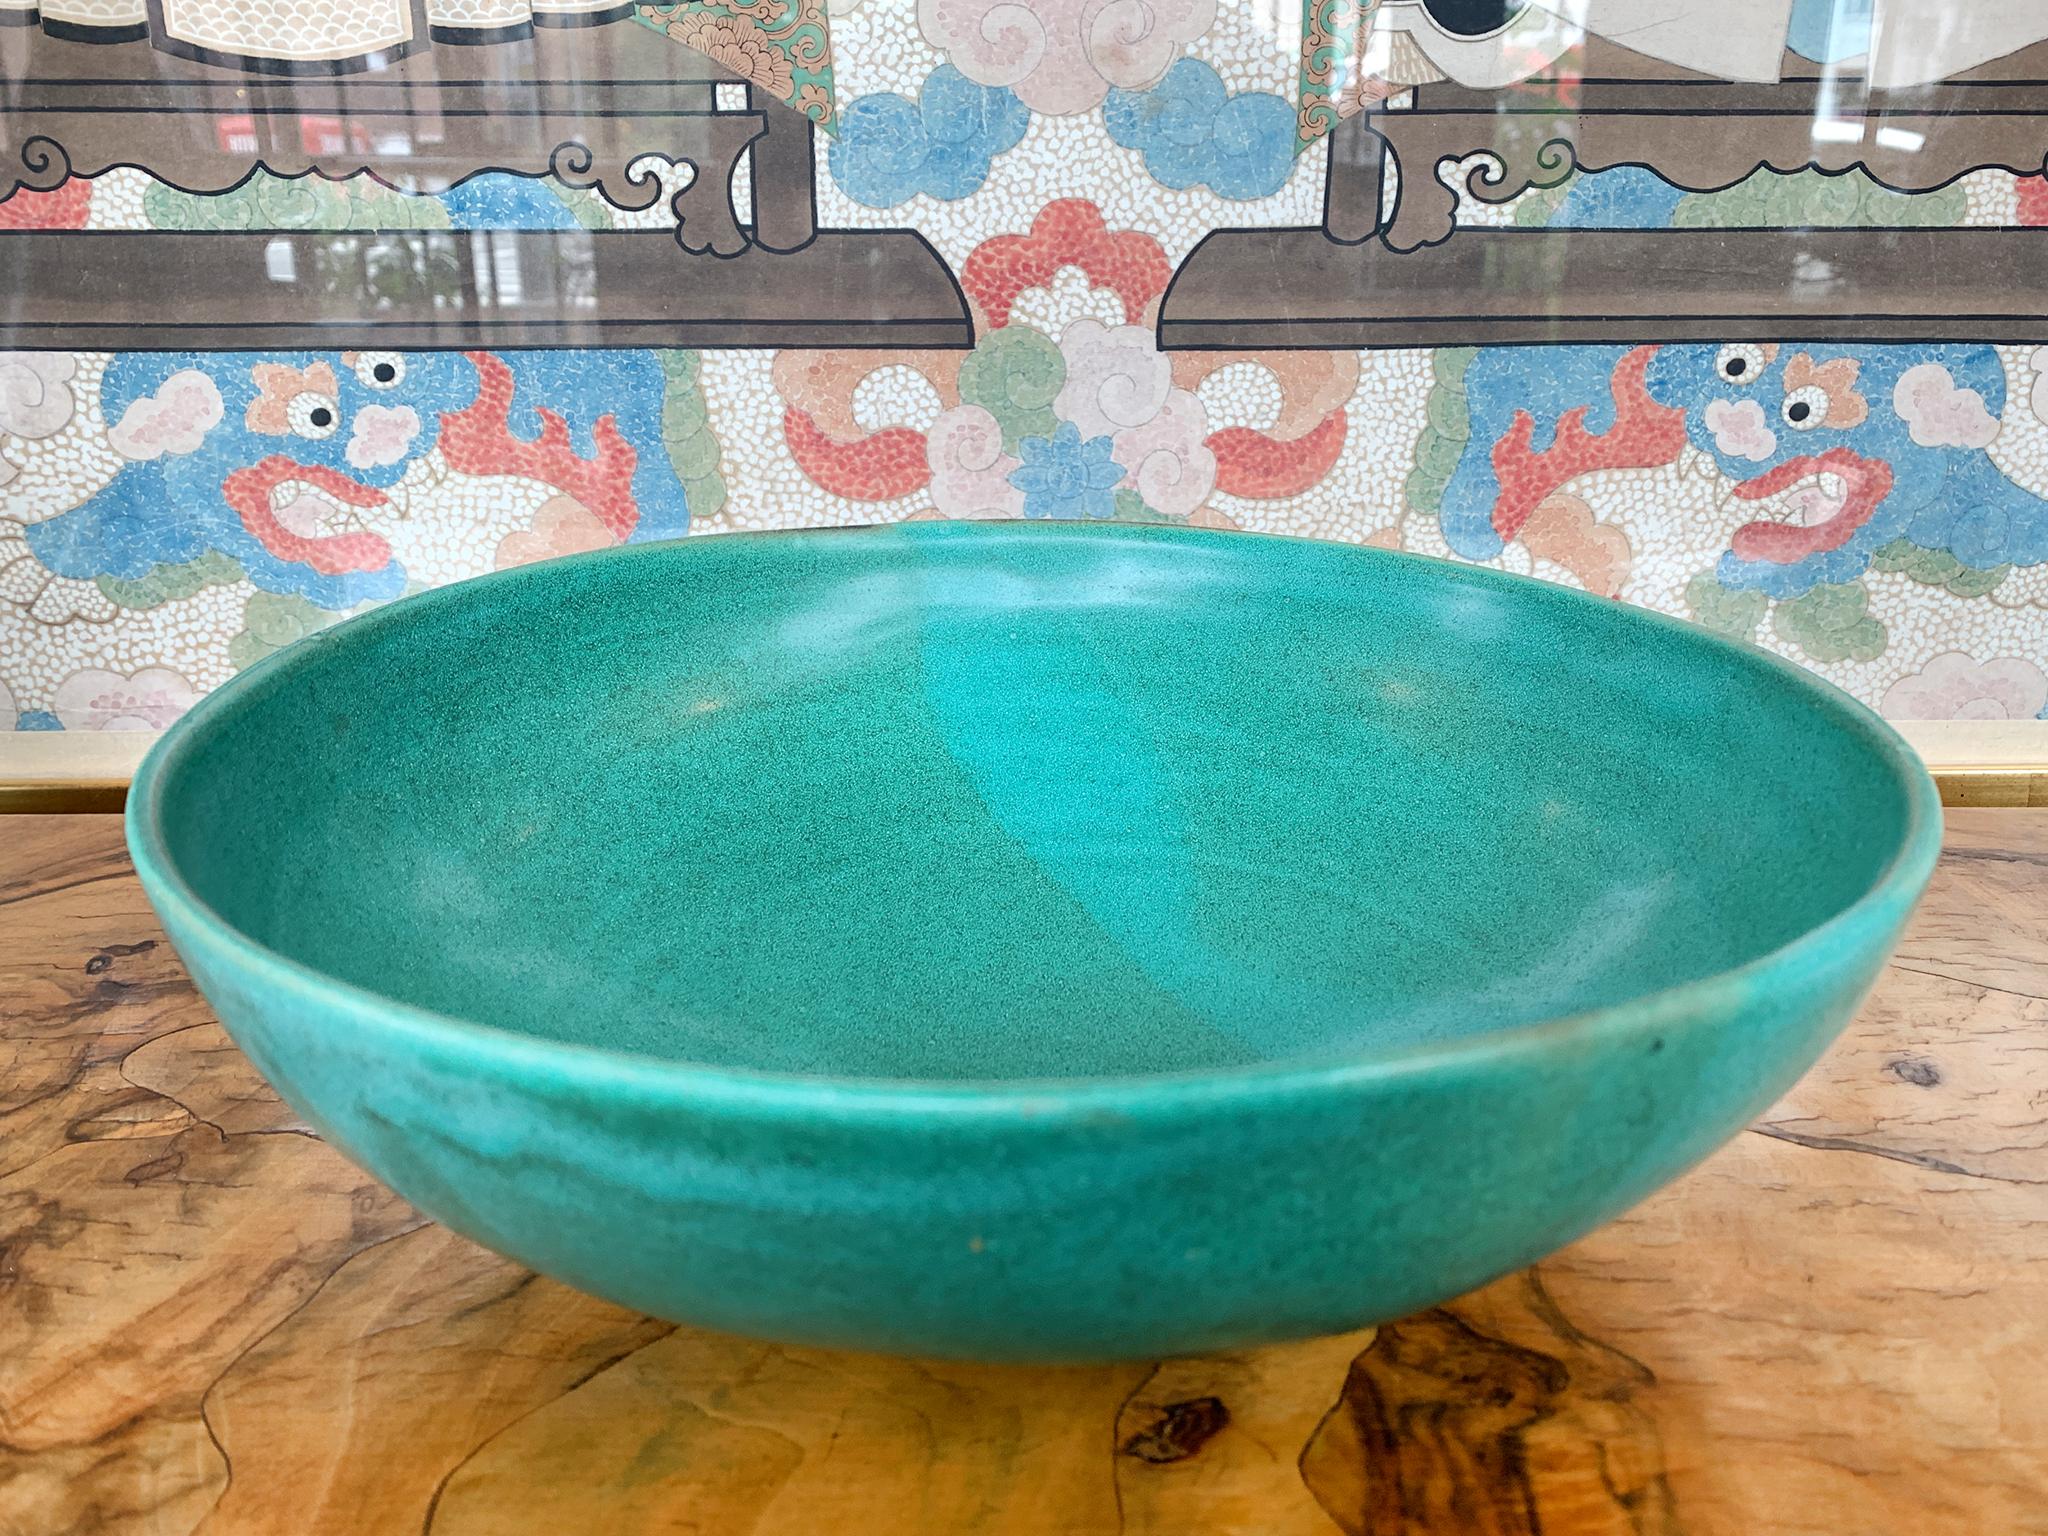 From Thom Lussier's Oxidized Copper Collection - a series of ceramic vessels that stand out for their brilliant palette and rich textures. This bowl is safe for food.

White stoneware with Cone 6 glaze.

Dimensions:
11 in. diameter
3.75 in.